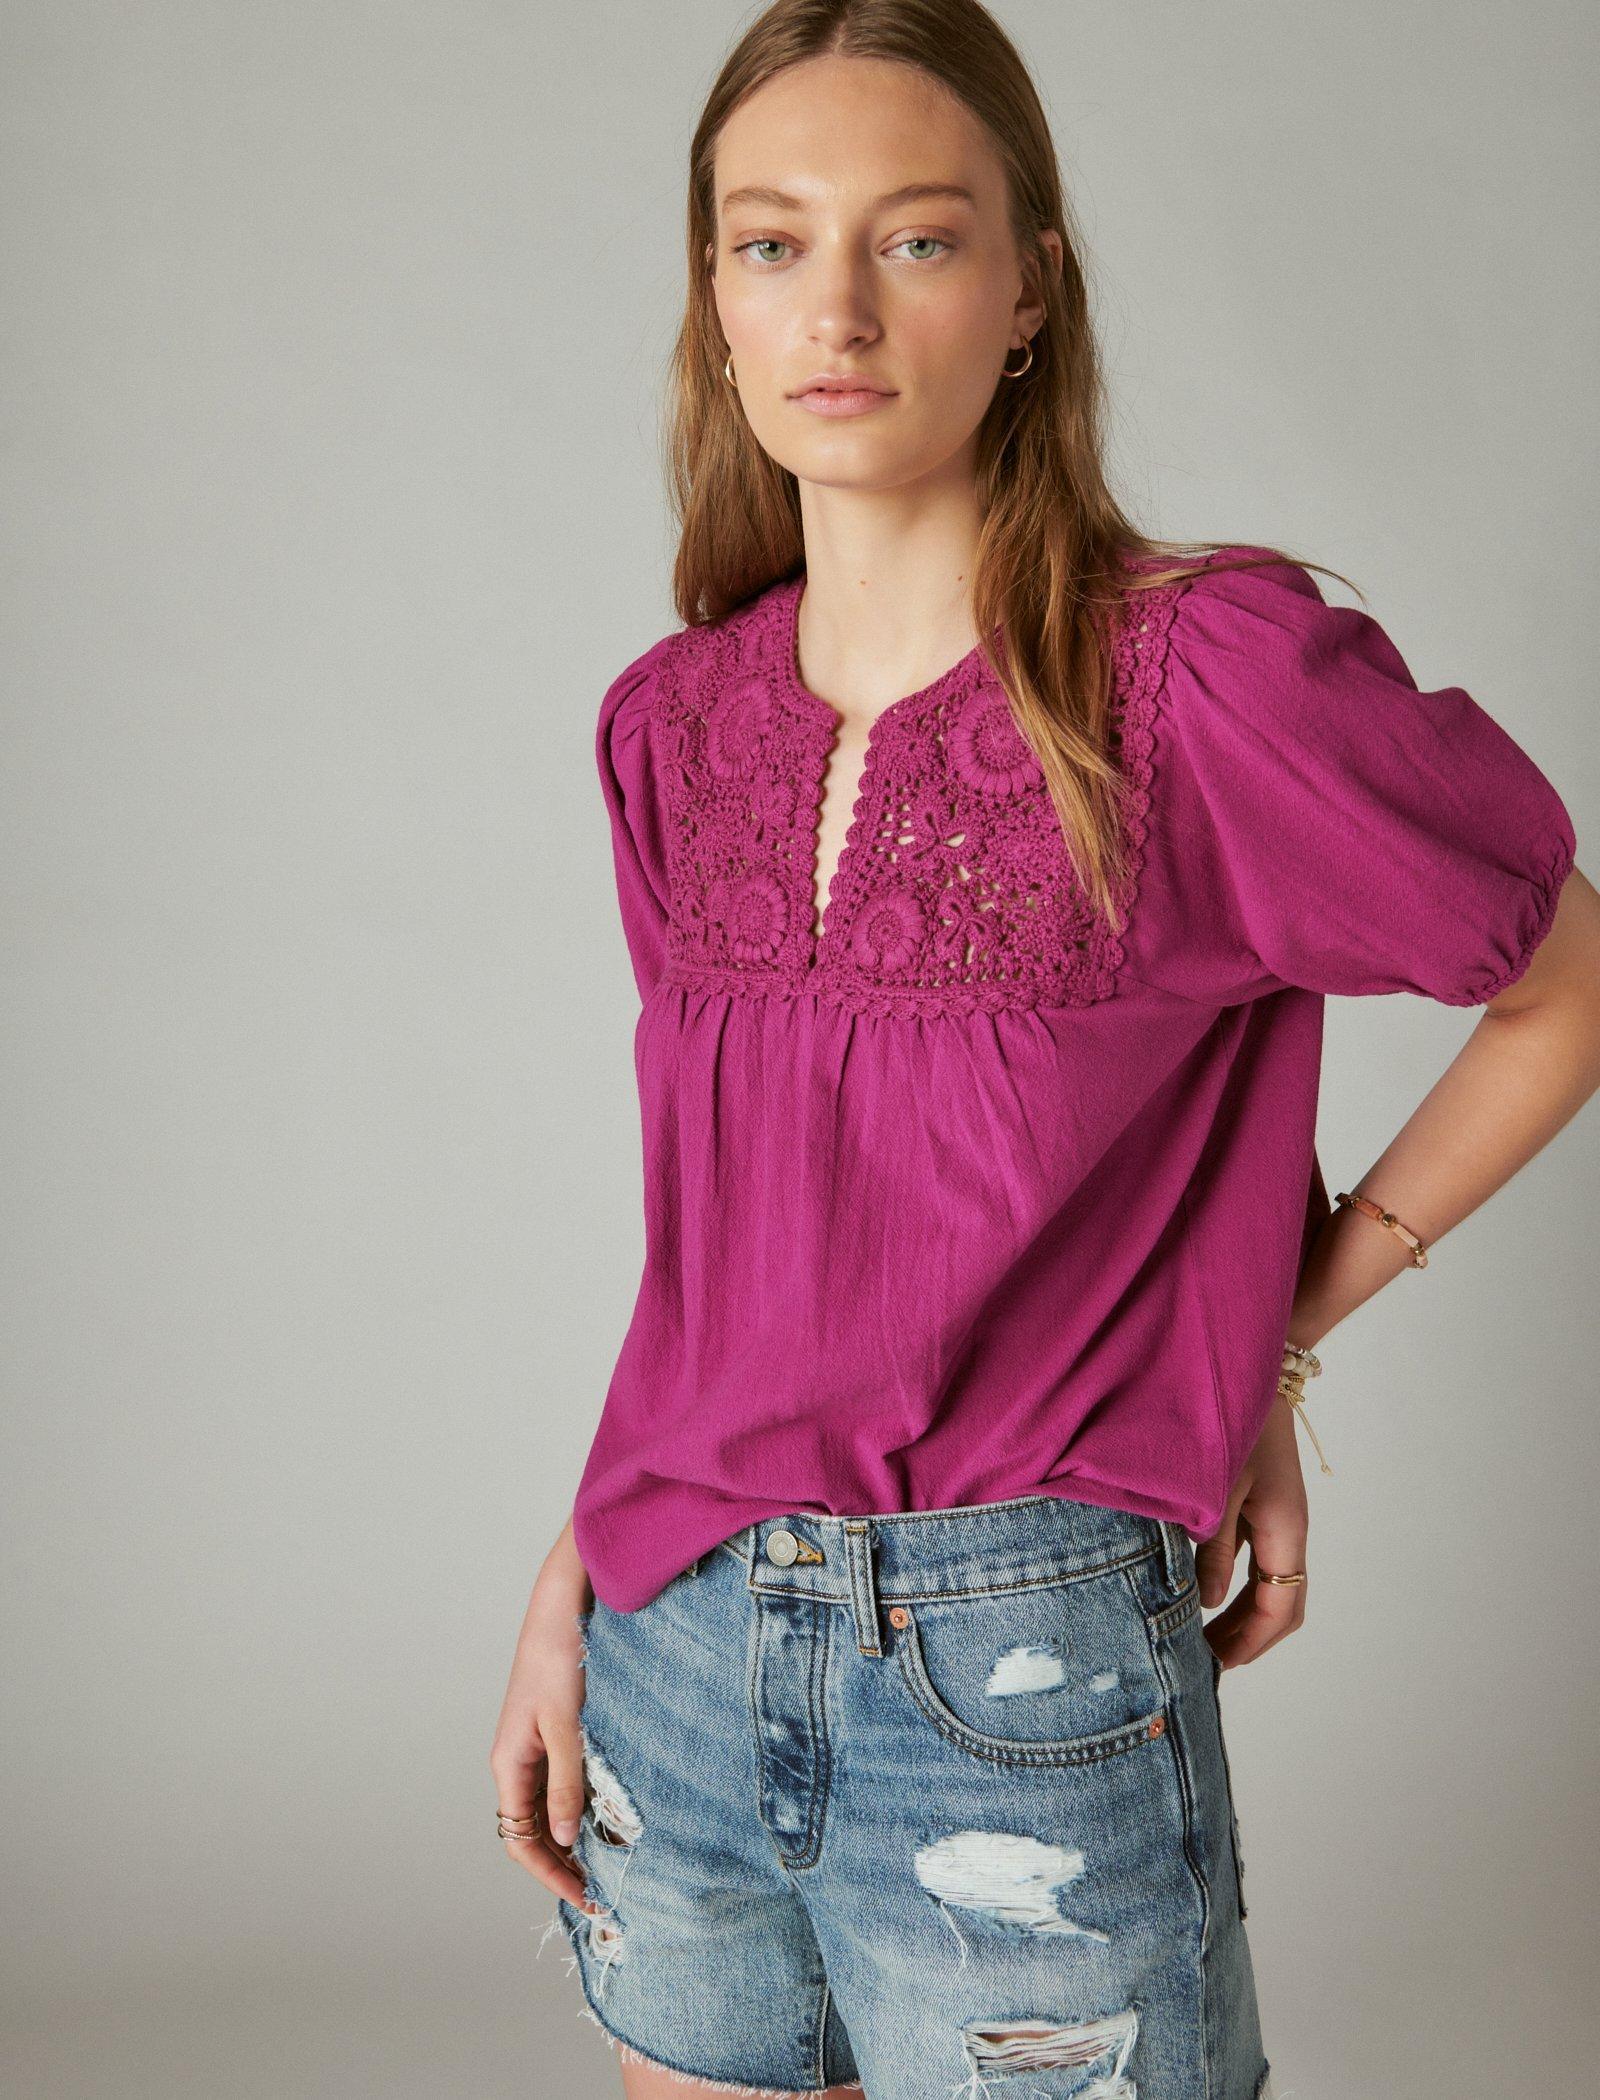 Lucky Brand Crochet Short Sleeve Peasant Top in Pink